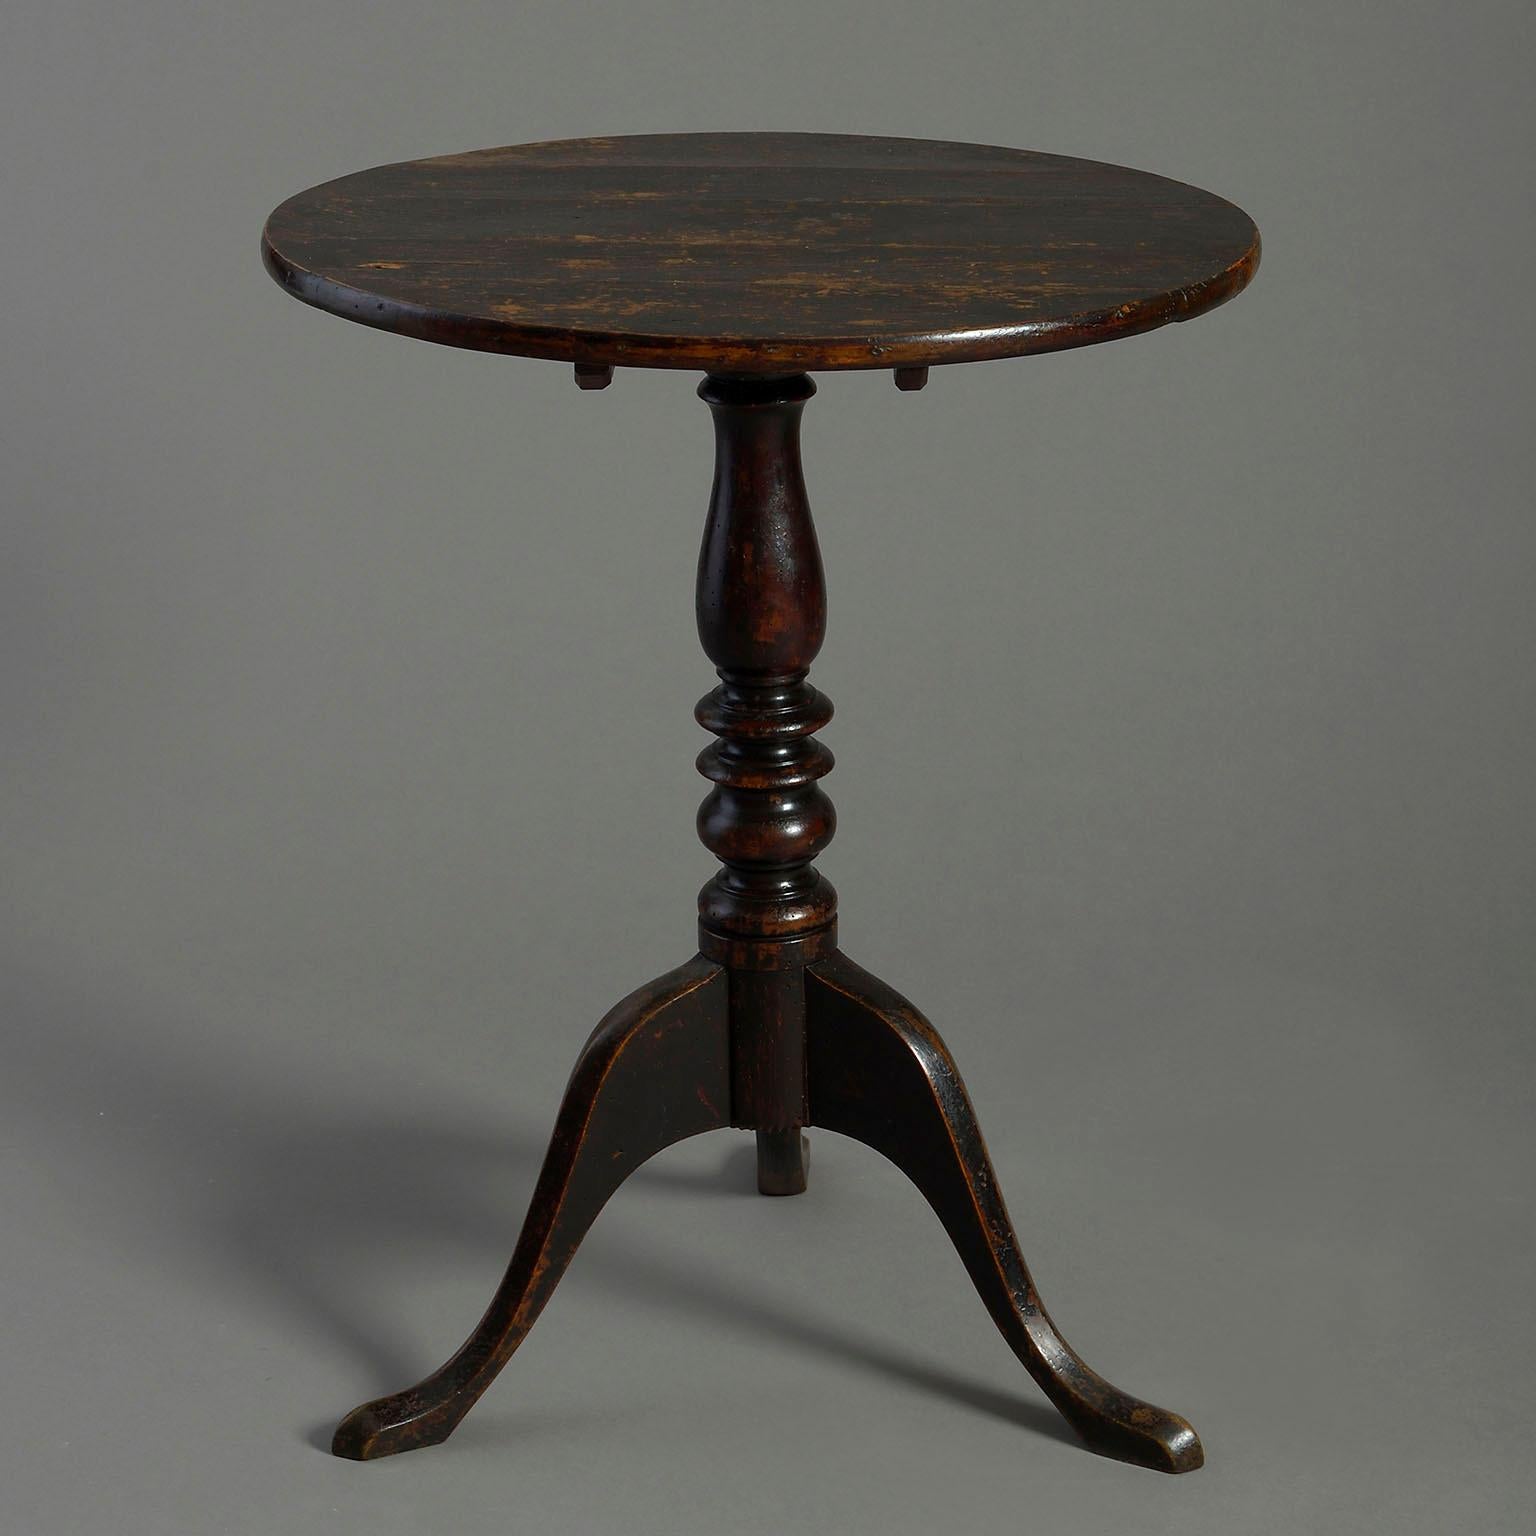 A mid-eighteenth century ebonised occasional tripod table, the circular top raised upon a turned stem and terminating in three cabriole legs.

Circa 1760 England

Dimensions: 23.25 W x 22.5 D x 29 H inches
59 W x 57 D x 73 H cm.